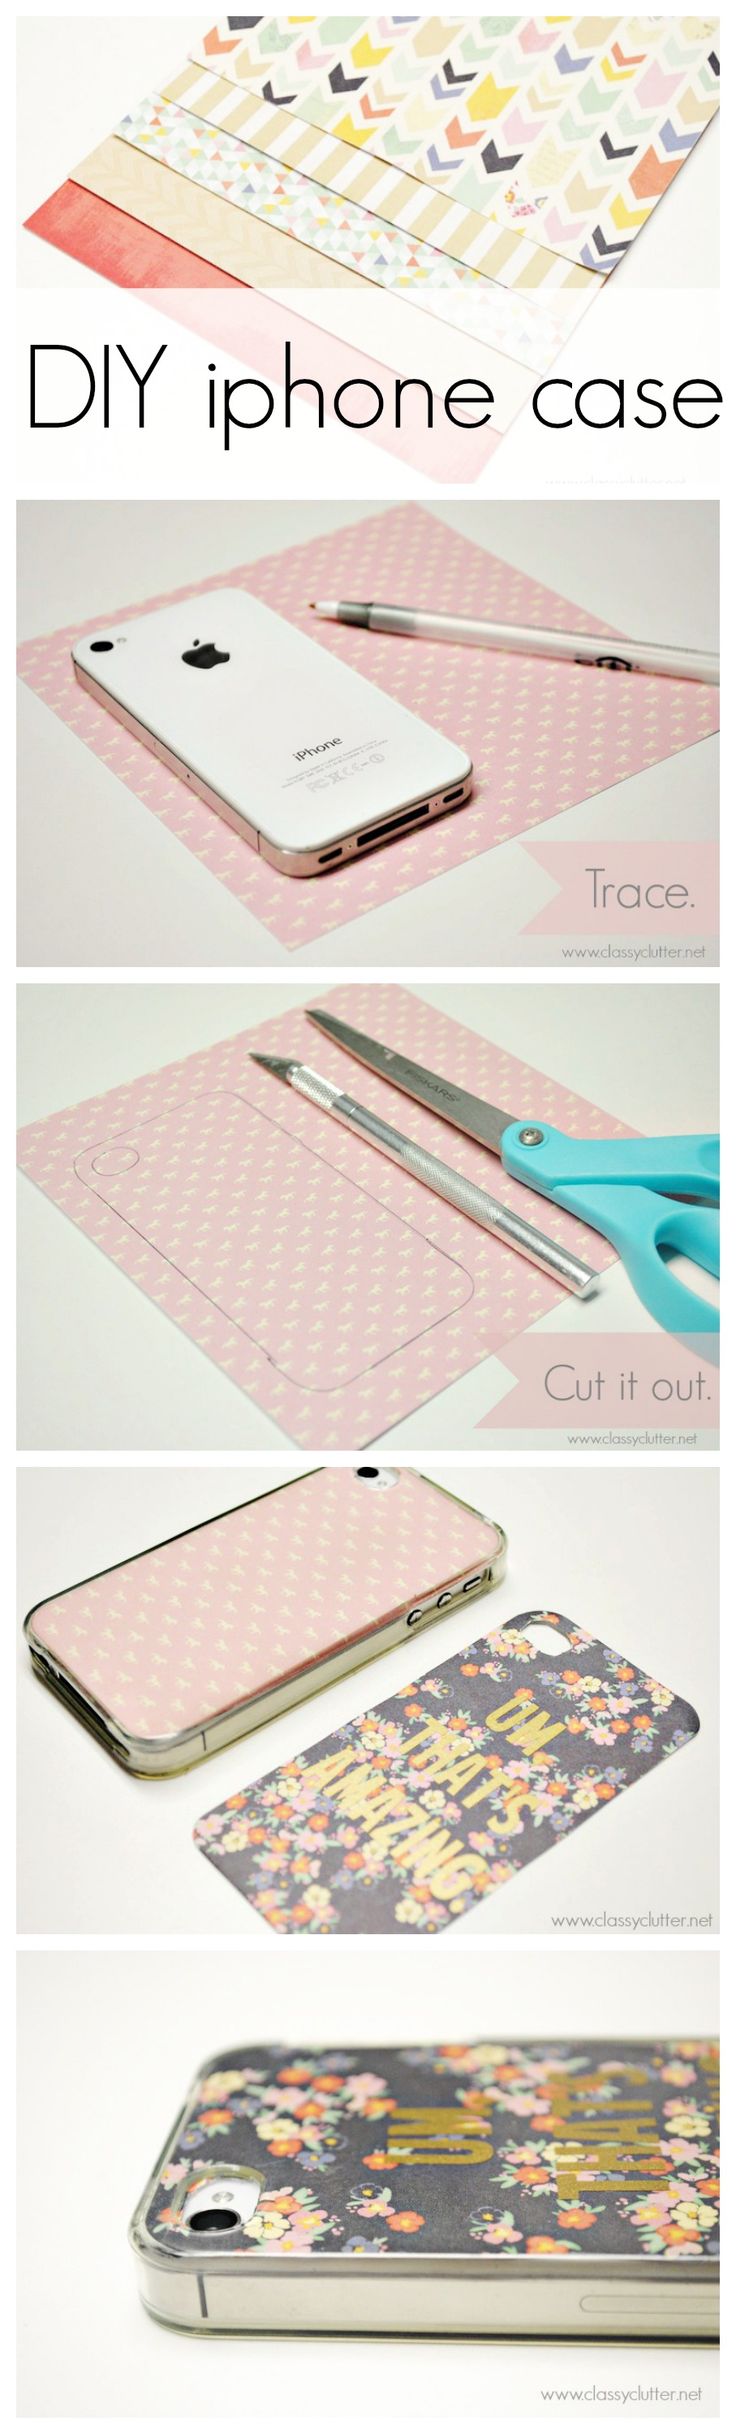 Diy Projects For The Phone Cases